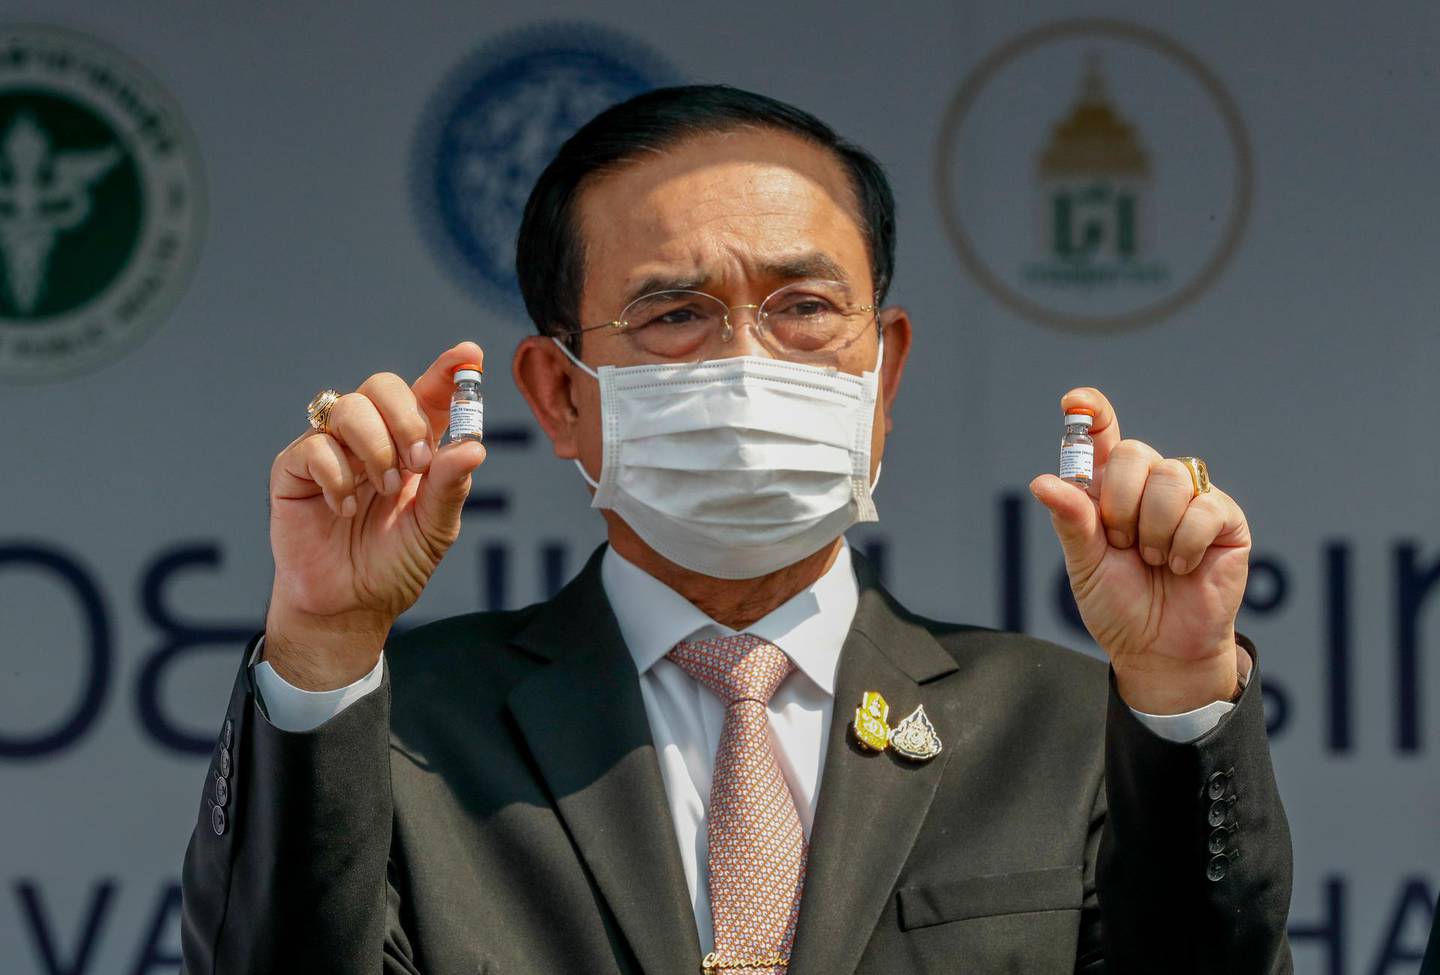 FILE - In this Feb. 24, 2021, file photo, Prime Minister Prayuth Chan-ocha holds samples of the Sinovac vaccine during a ceremony to mark the arrival of 200,000 doses in a shipment at the Suvarnabhumi airport in Bangkok. Prayuth on Wednesday, June 16, 2021, declared that the country is planning to fully reopen to foreign visitors without restrictions by mid-October, as the government seeks to restart the crucial tourist industry, heavily hit by the coronavirus pandemic. (AP Photo/Sakchai Lalit, File)